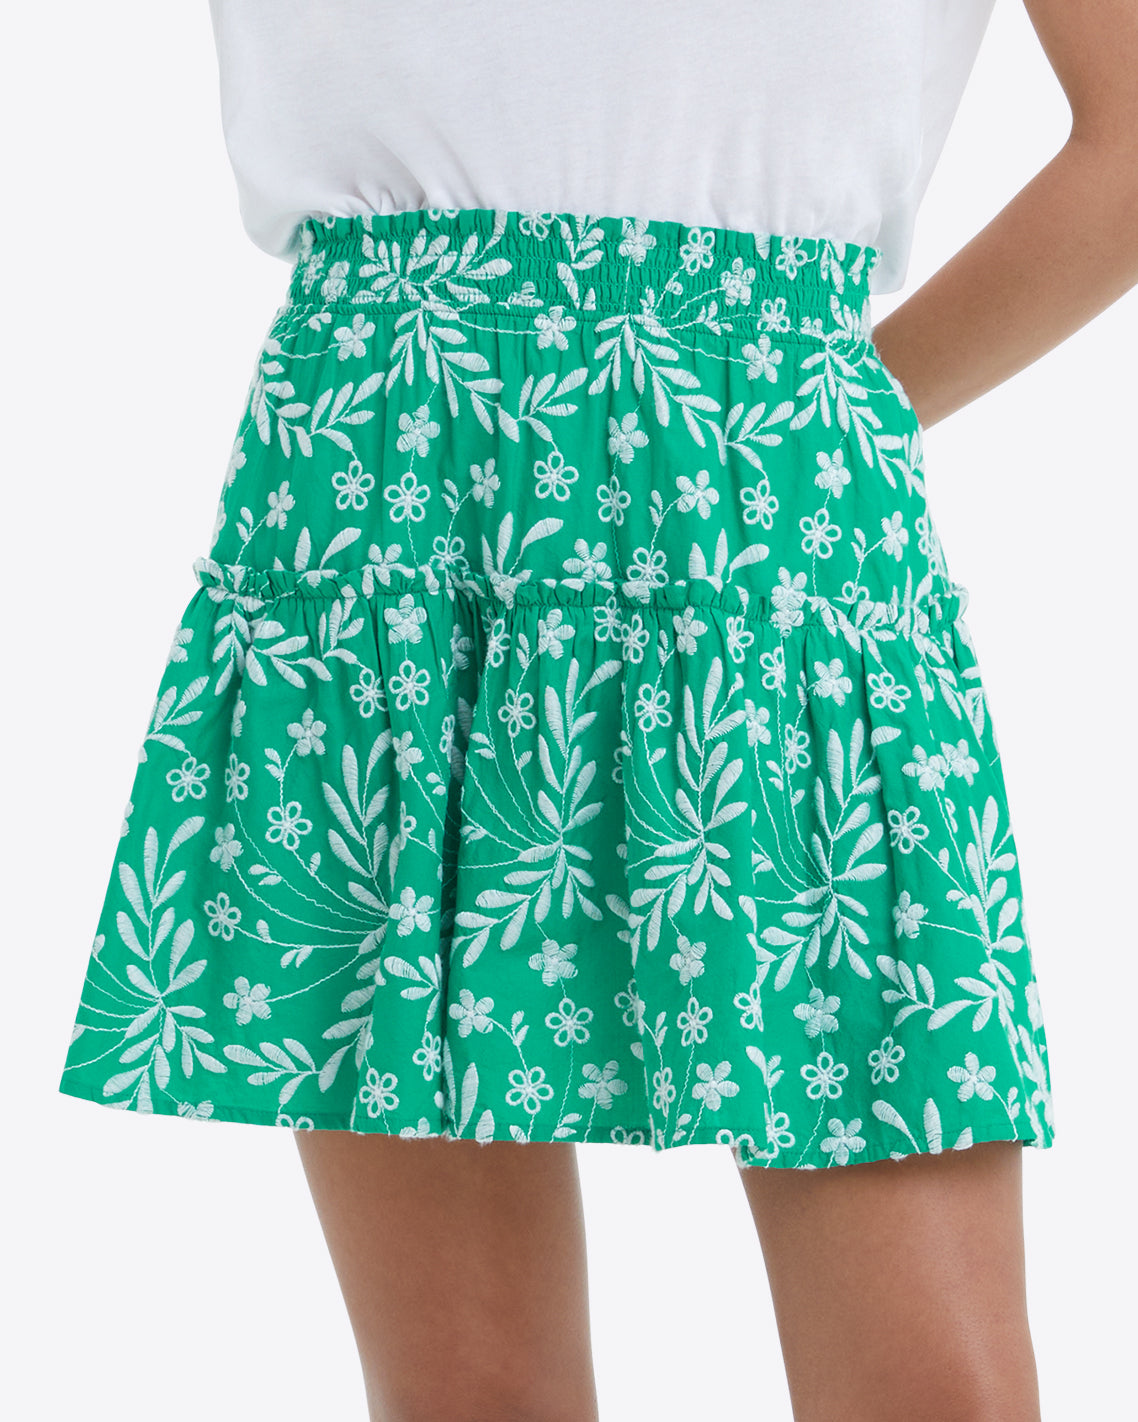 Pull On Mini Skirt in Embroidered Floral